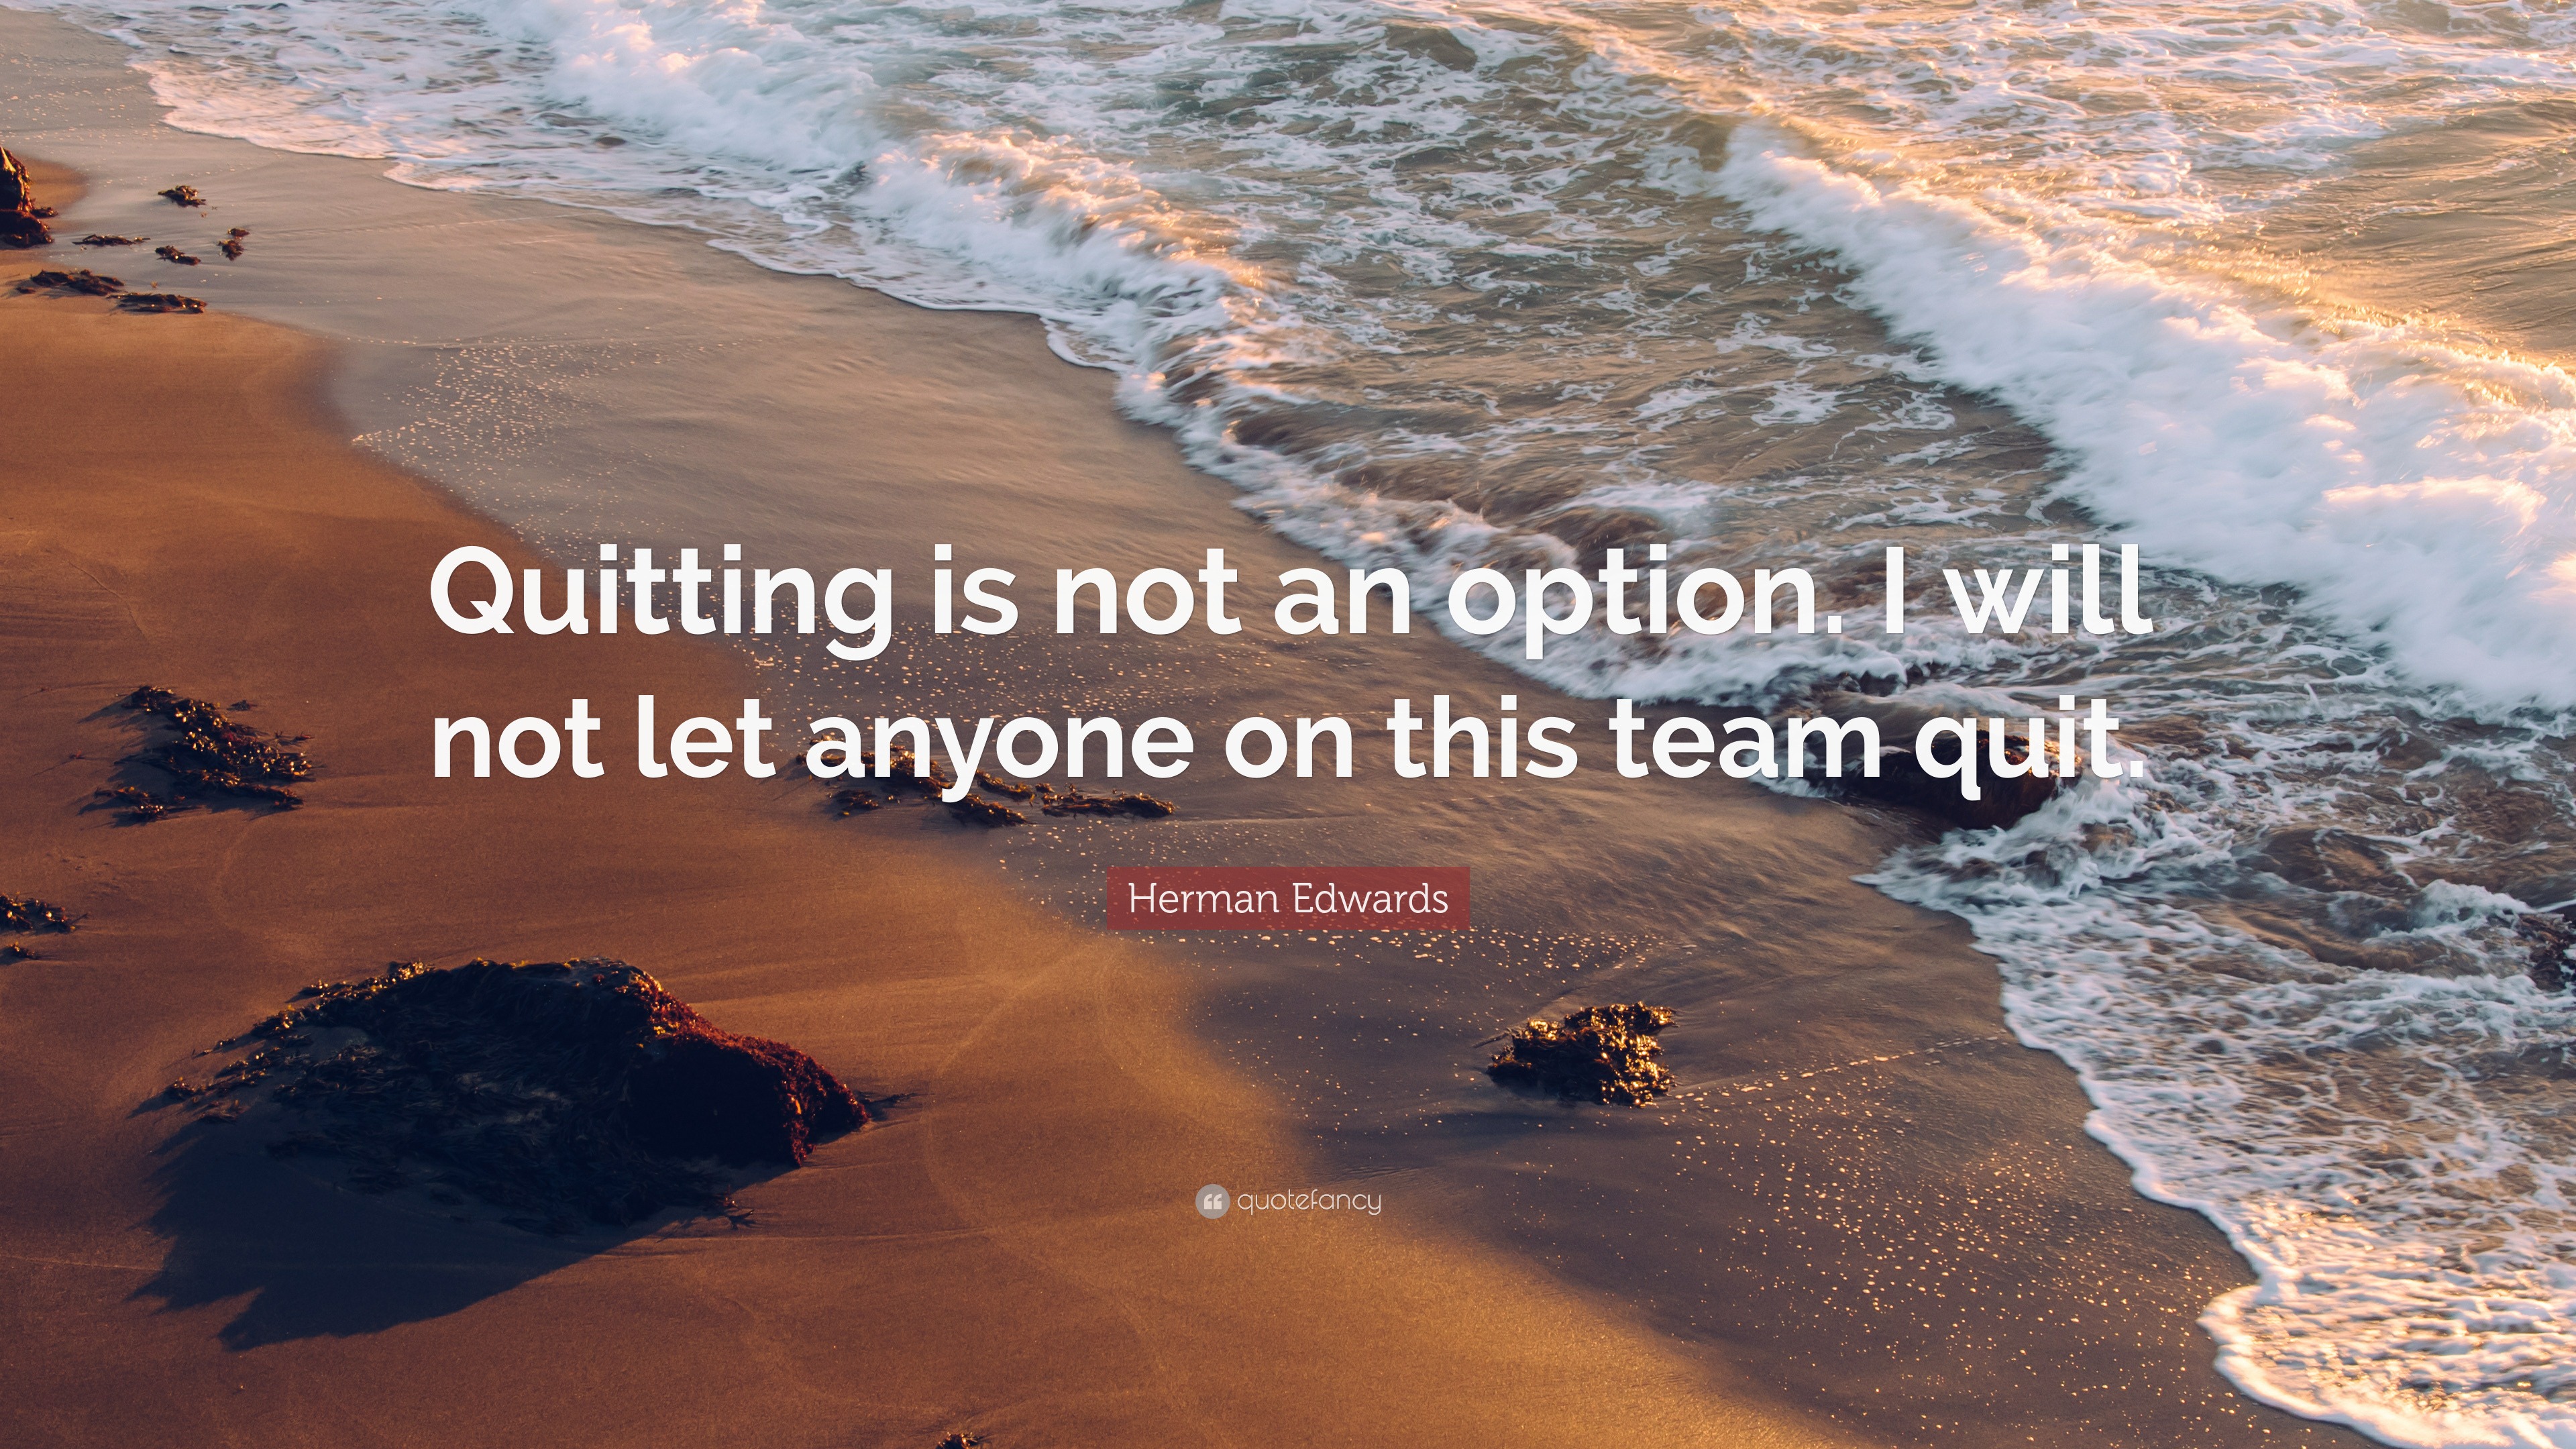 Herman Edwards Quote: “Quitting is not an option. I will not let anyone